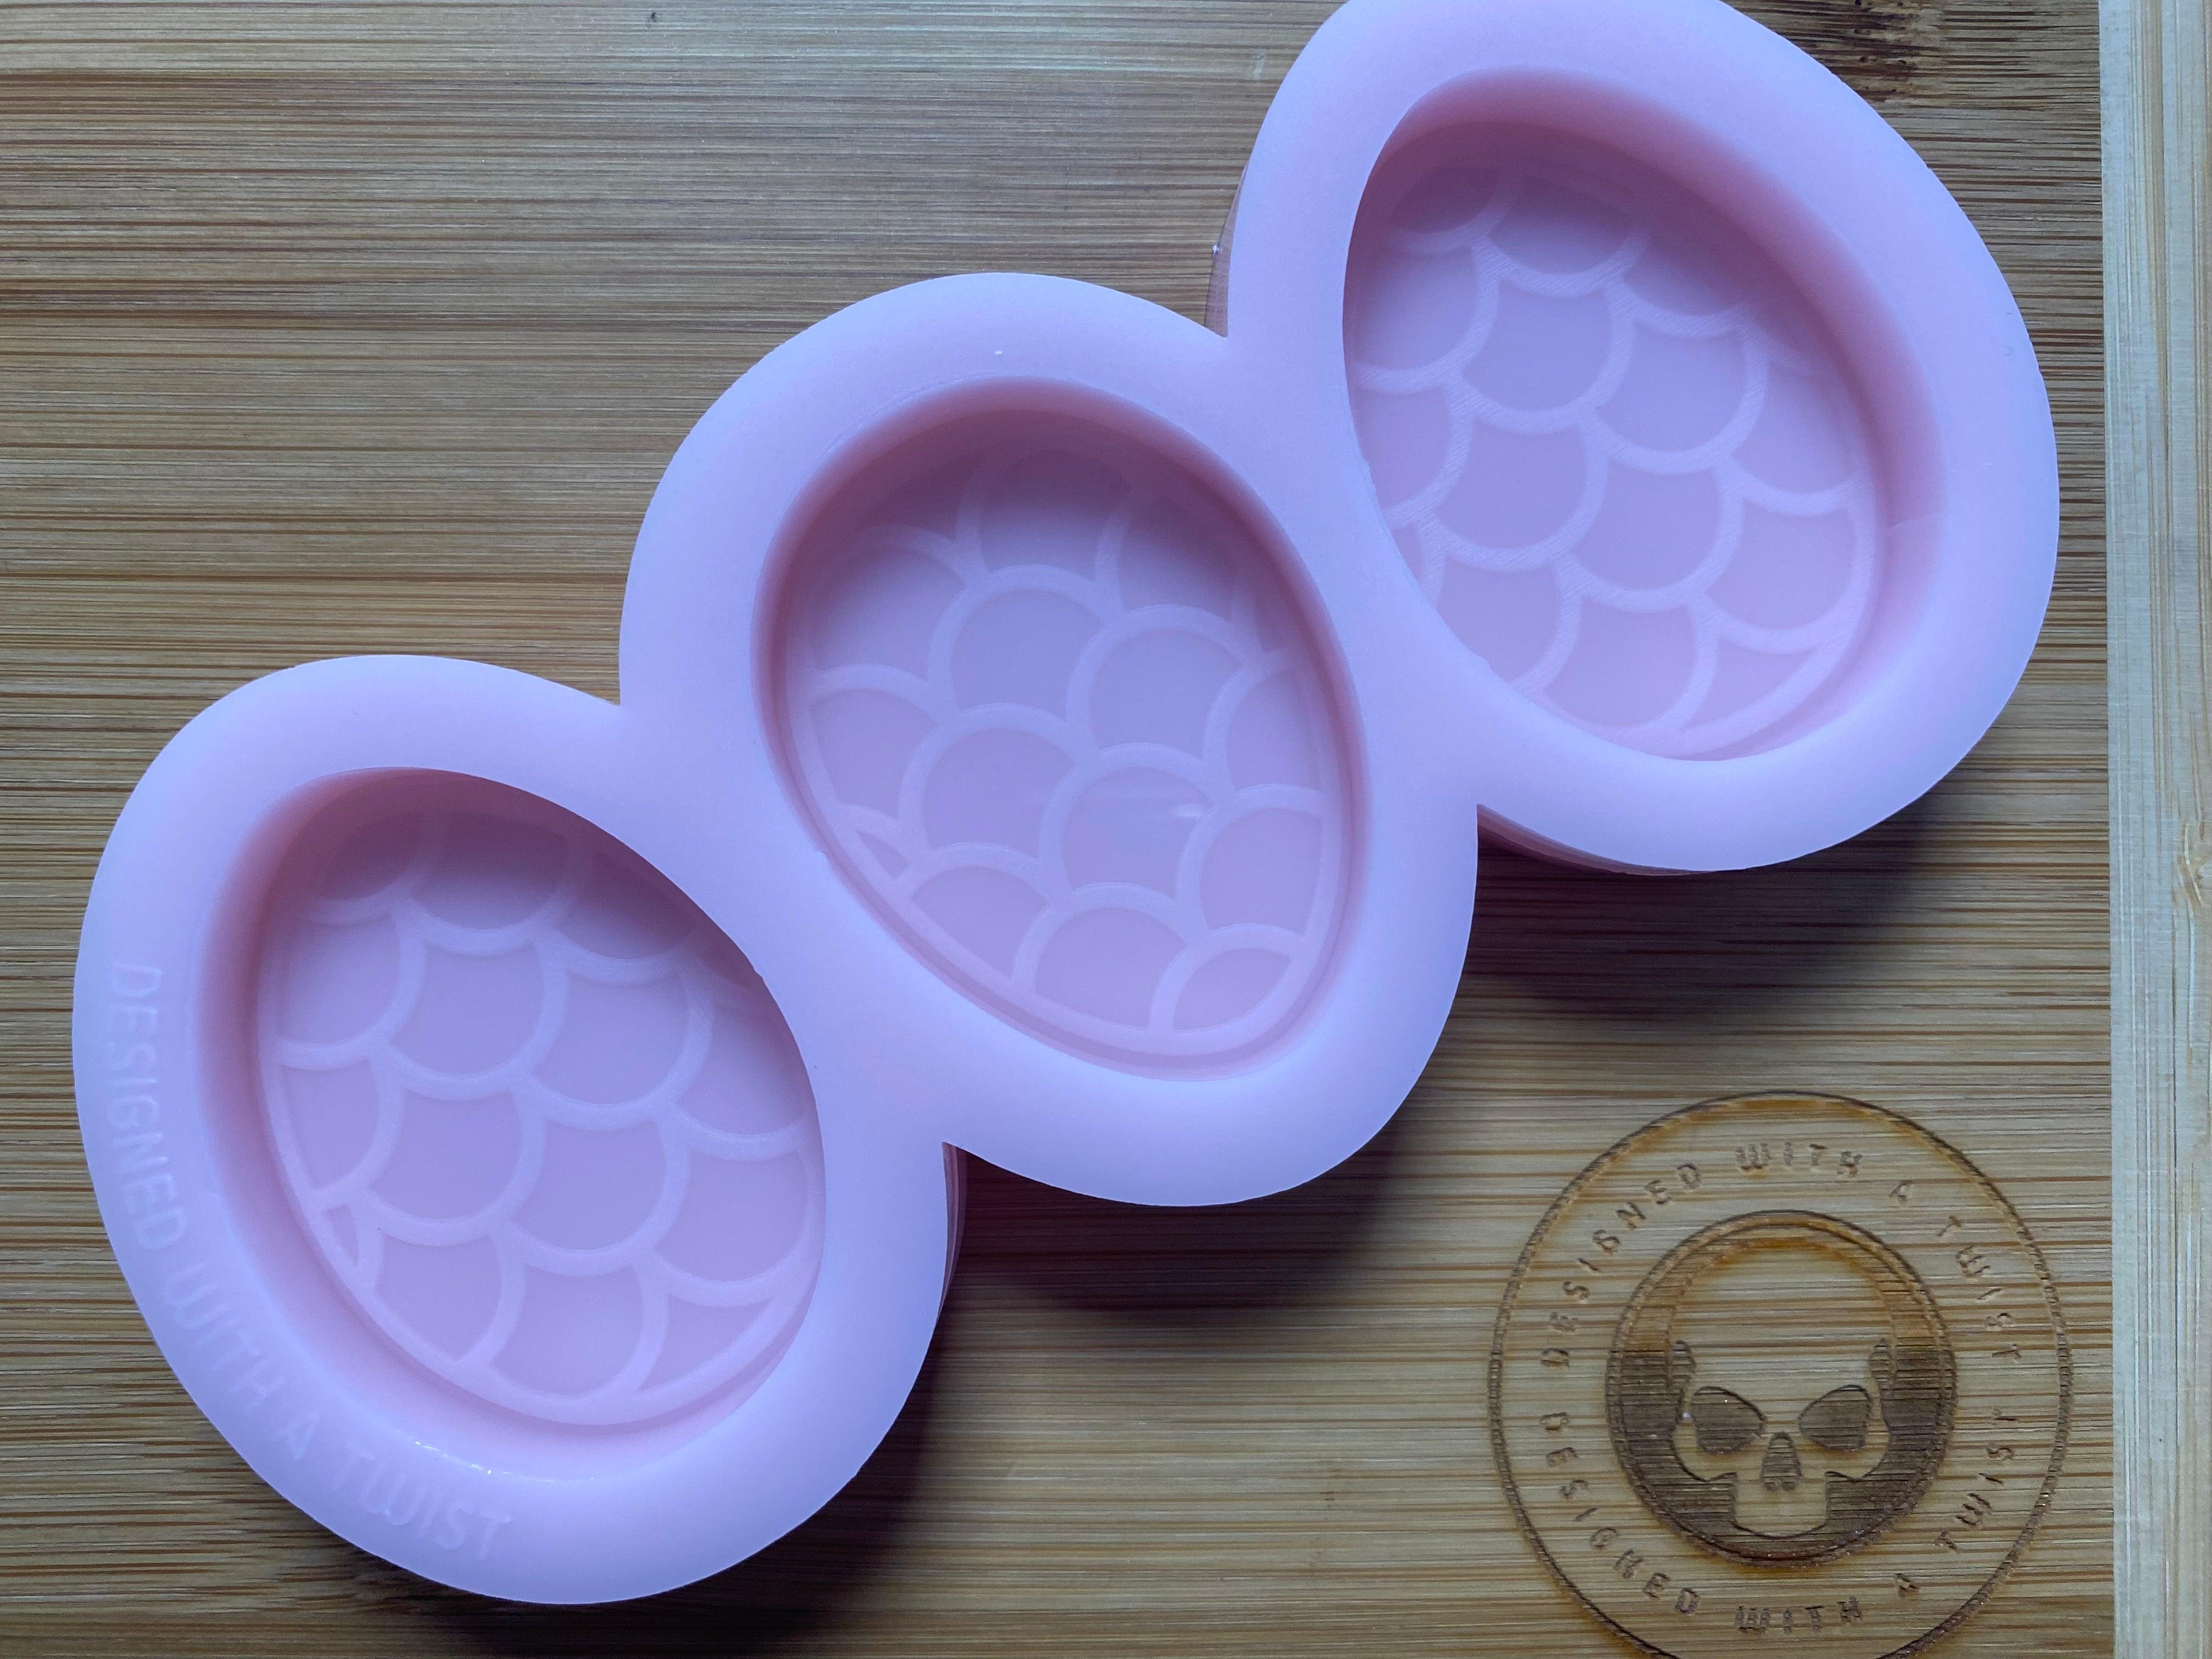 Dragon Egg Wax Melt Silicone Mold - Designed with a Twist  - Top quality silicone molds made in the UK.